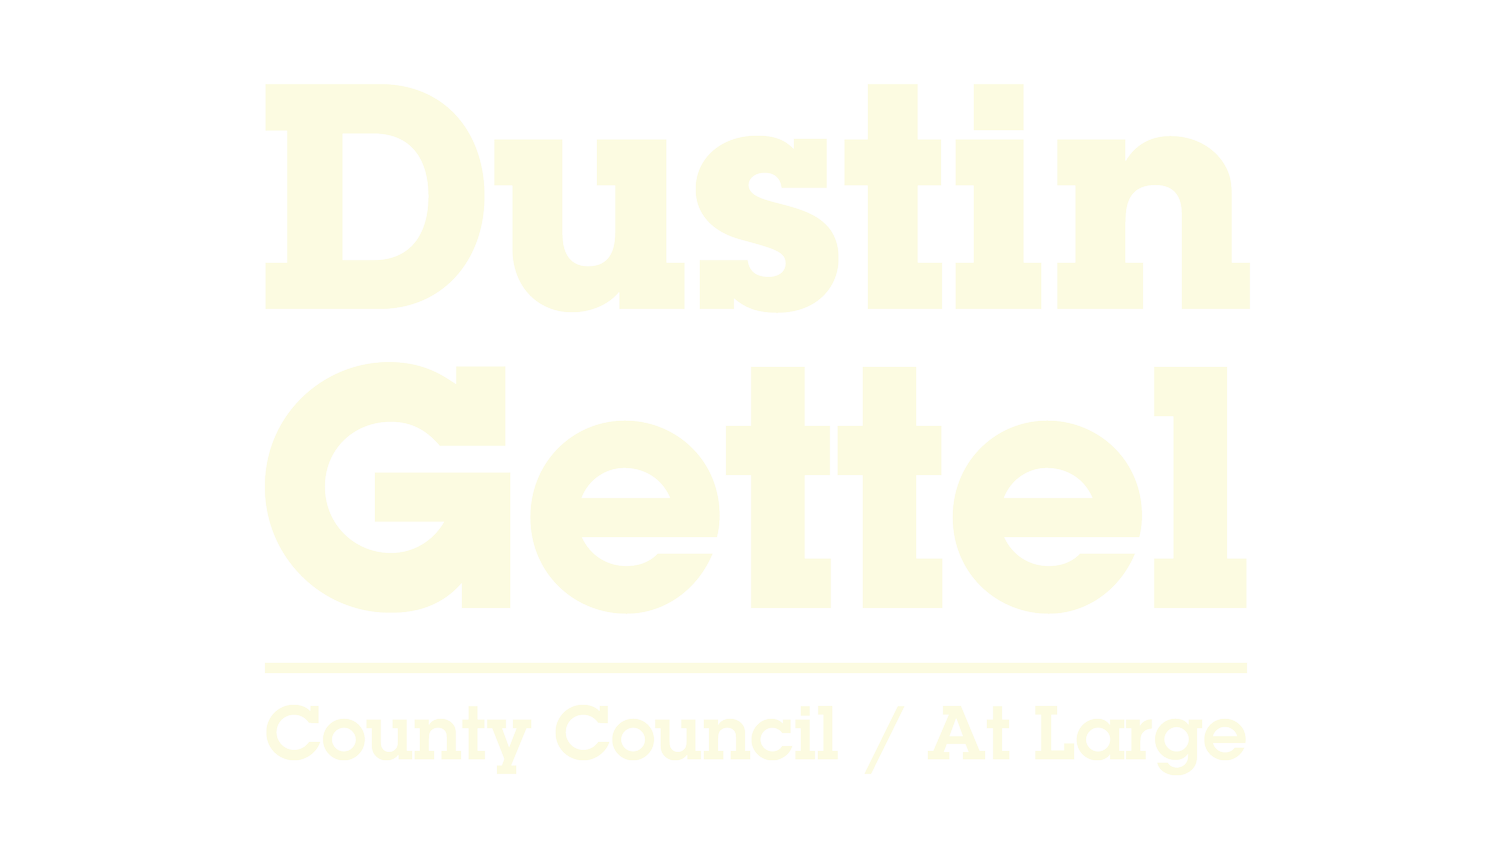 Dustin for Salt Lake County Council